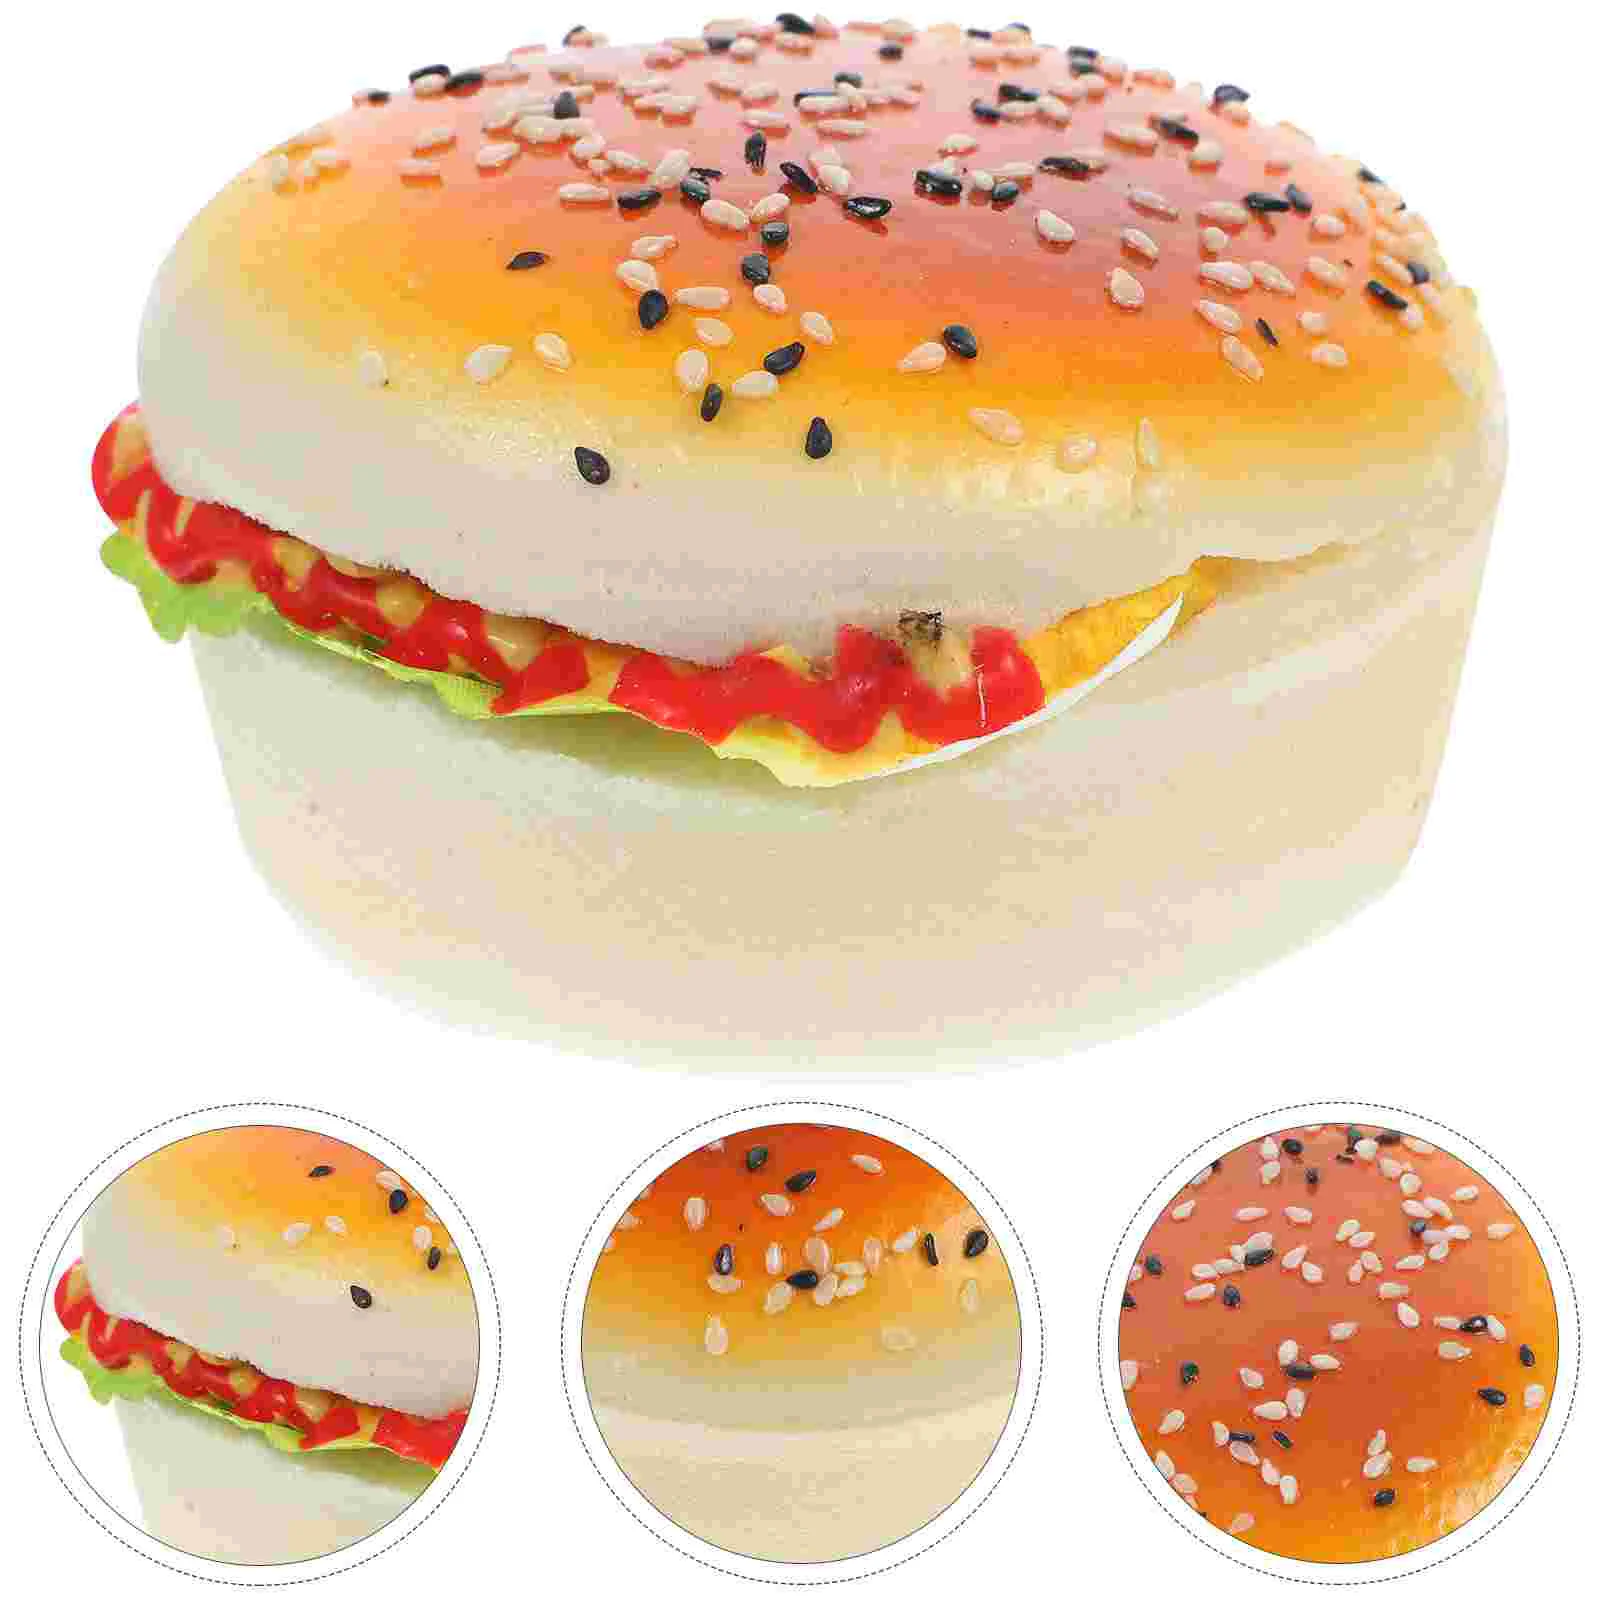 

Fake Model Bread Toy Simulation Artificial Pretend Models Burger Kids Play French Fidget Sensory Squeeze Imitation Bakery Photo